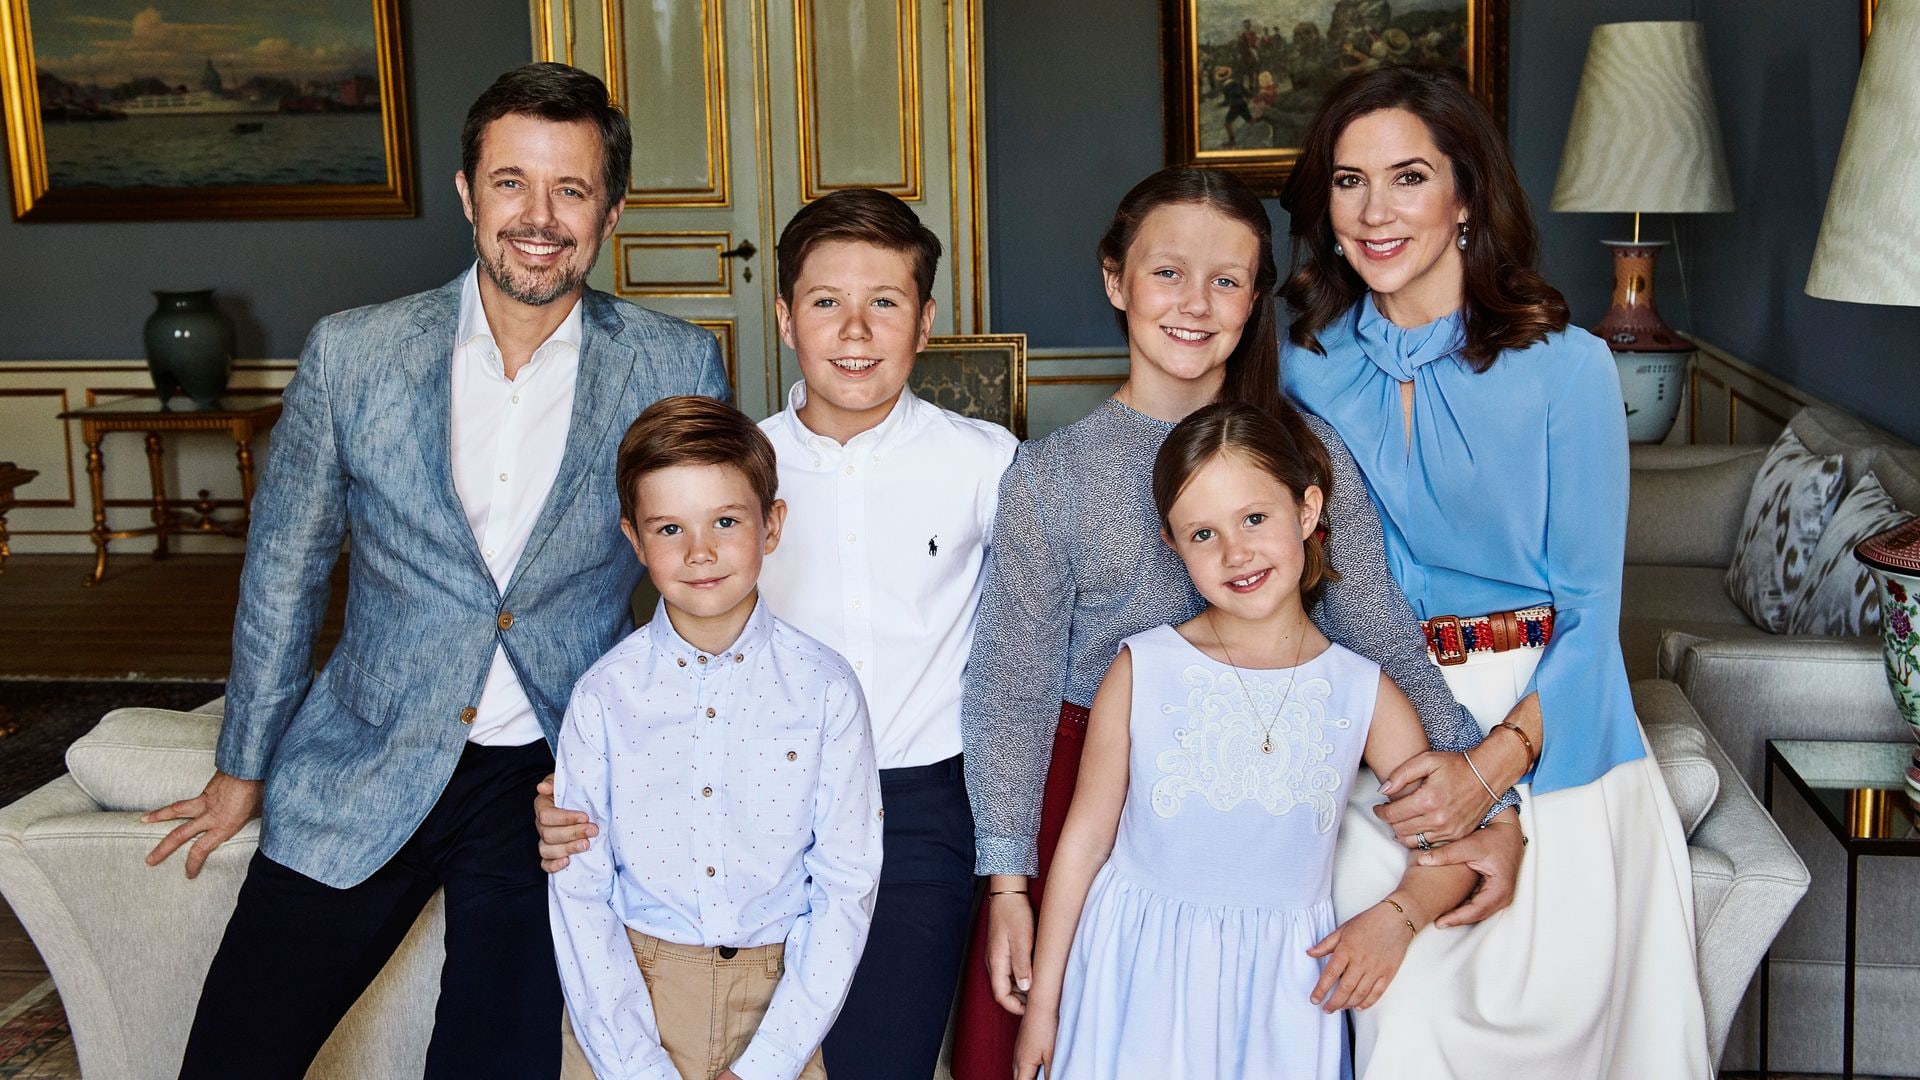 The Crown Prince family on the occasion of Prince Frederik's 50th birthday in 2018